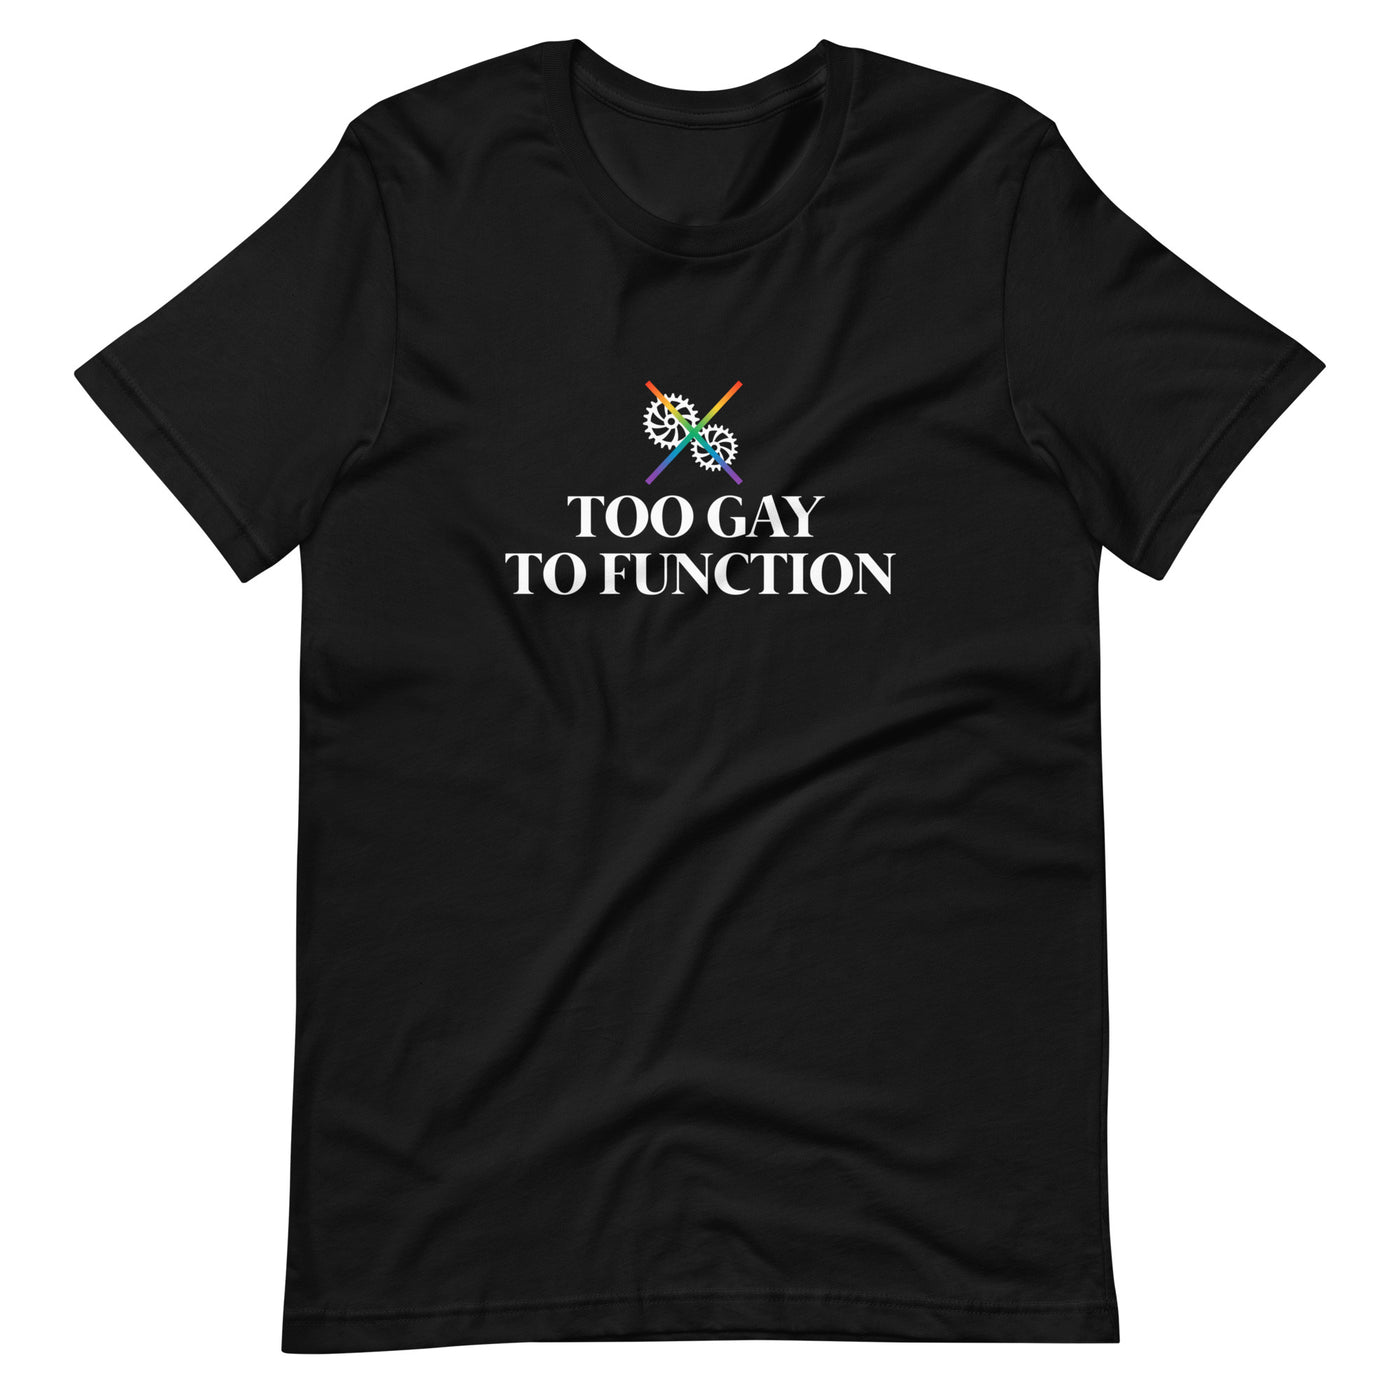 Pride Clothes - Whoa! Too Gay to Function Pride Items T-Shirt - Black